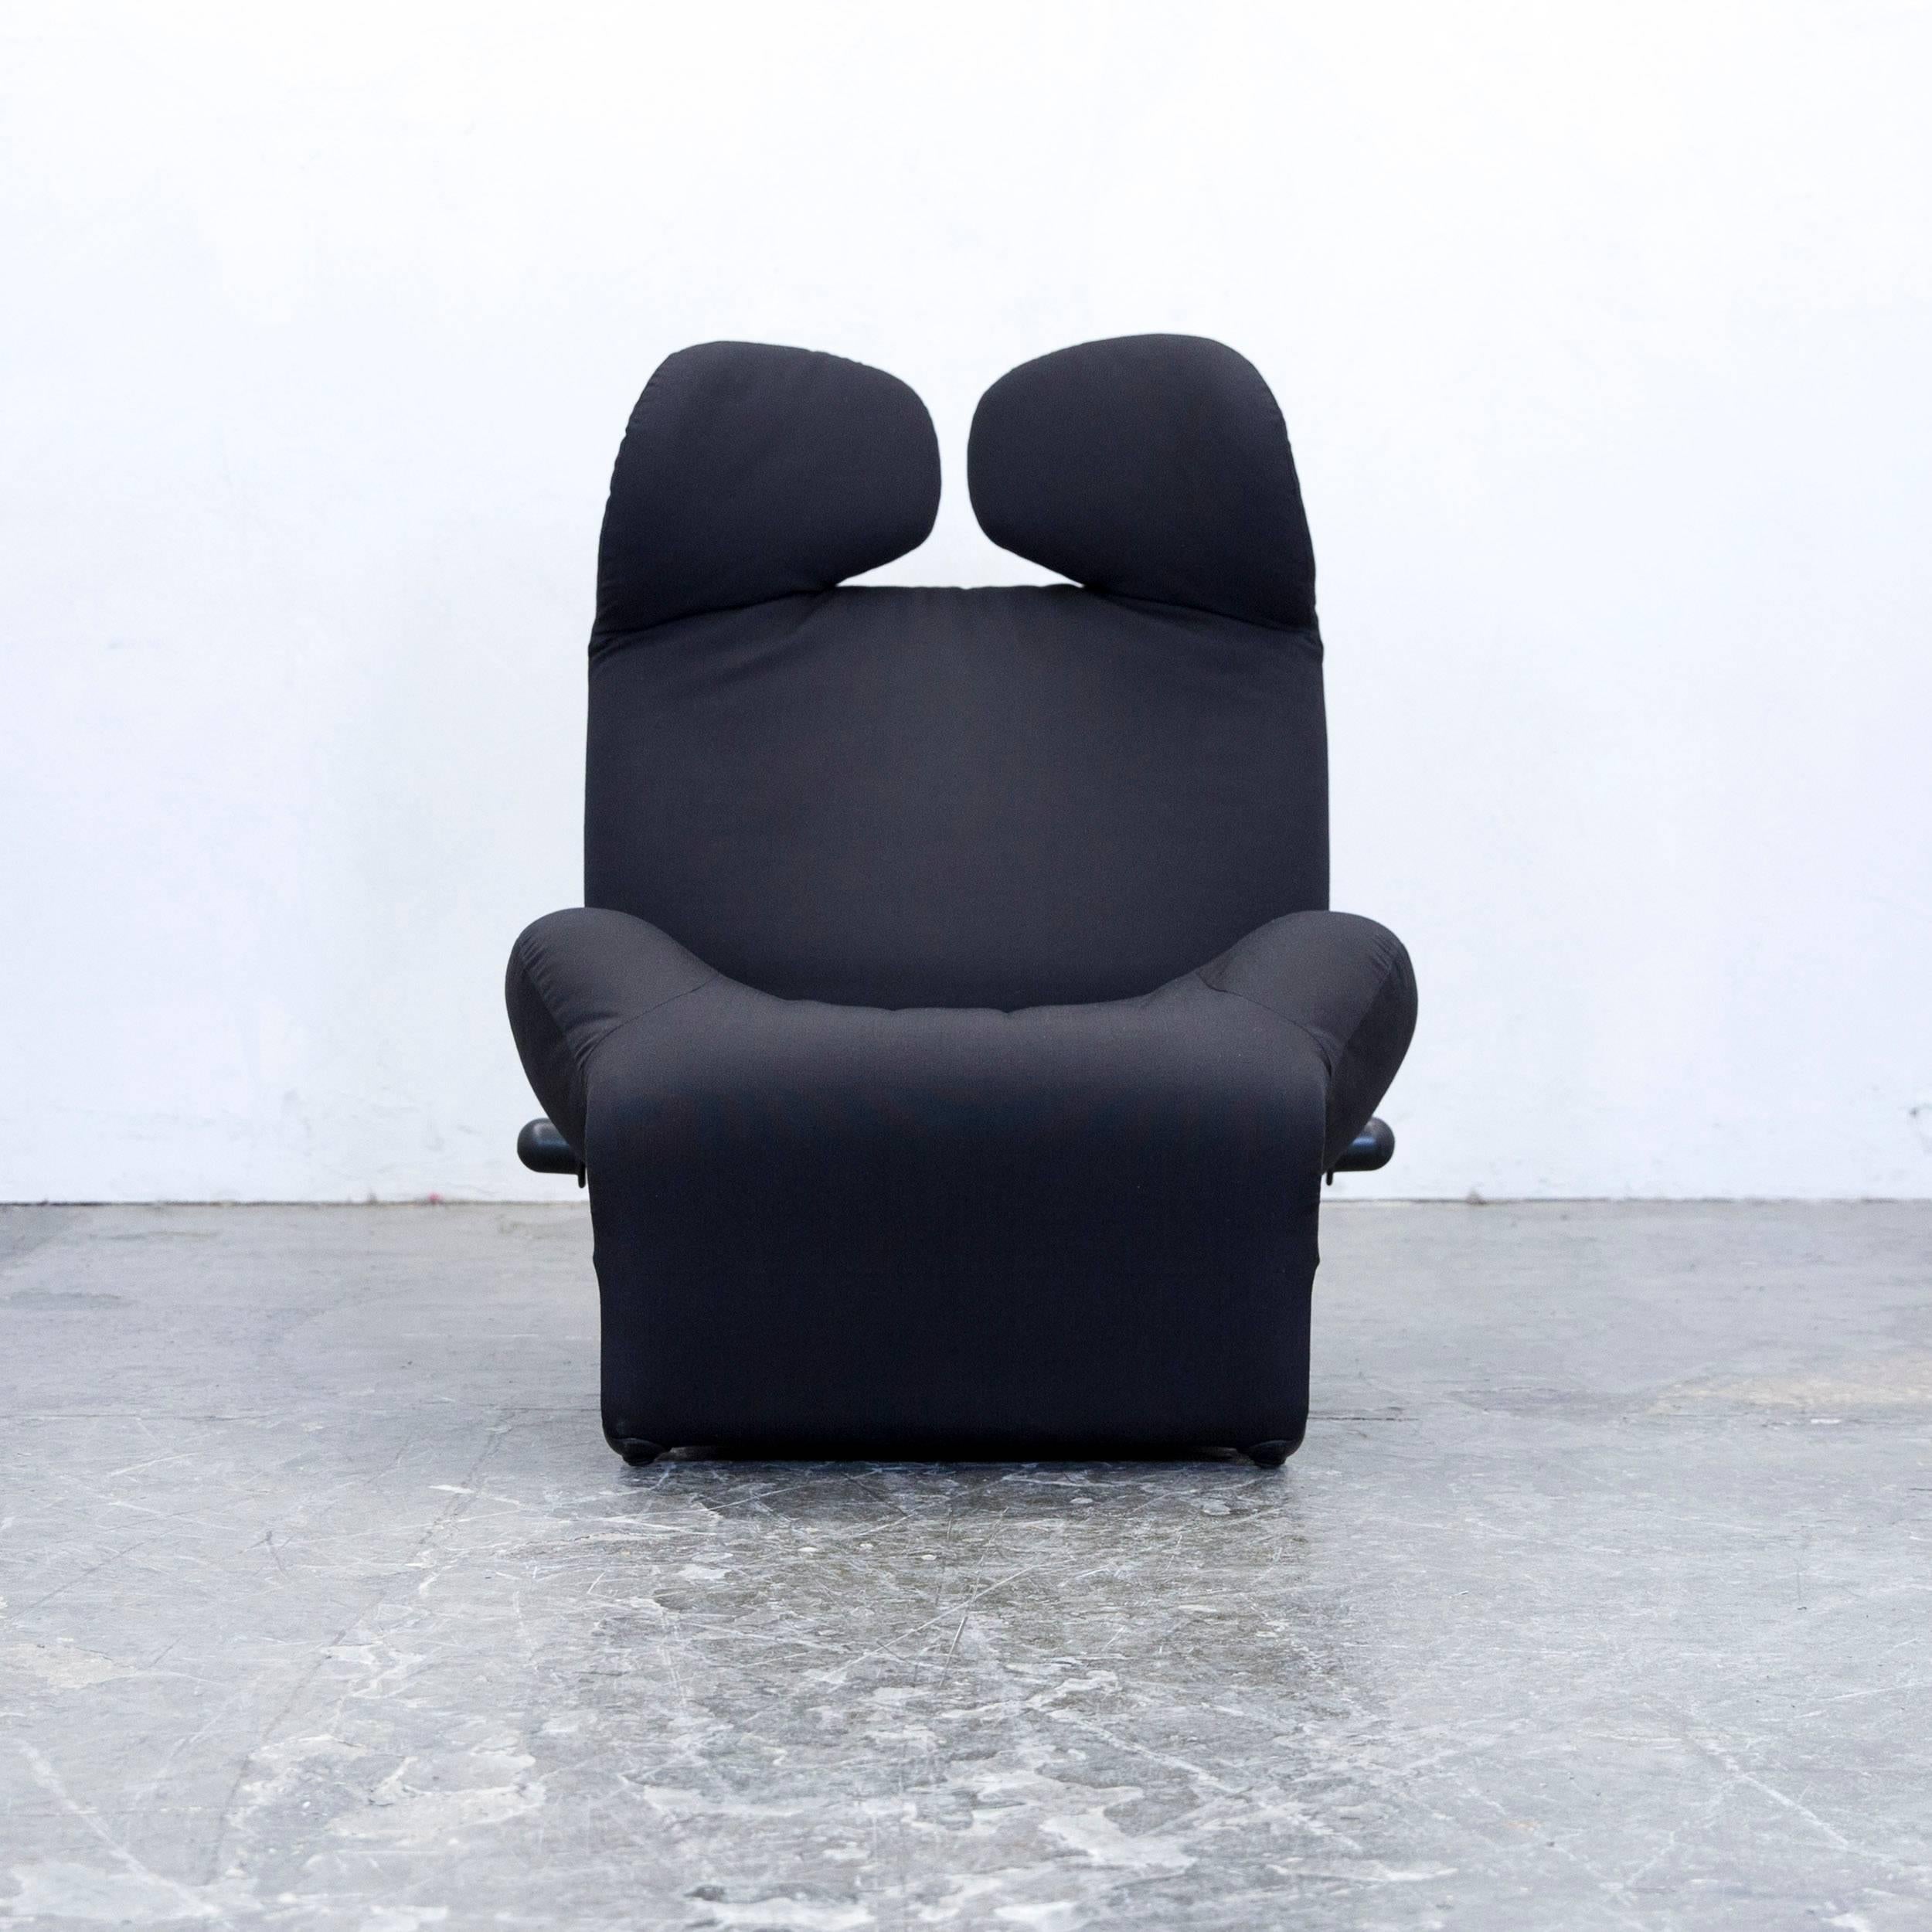 Black colored original Cassina Wink designer armchair, in a minimalistic and modern design, with convenient functions, made for pure comfort.